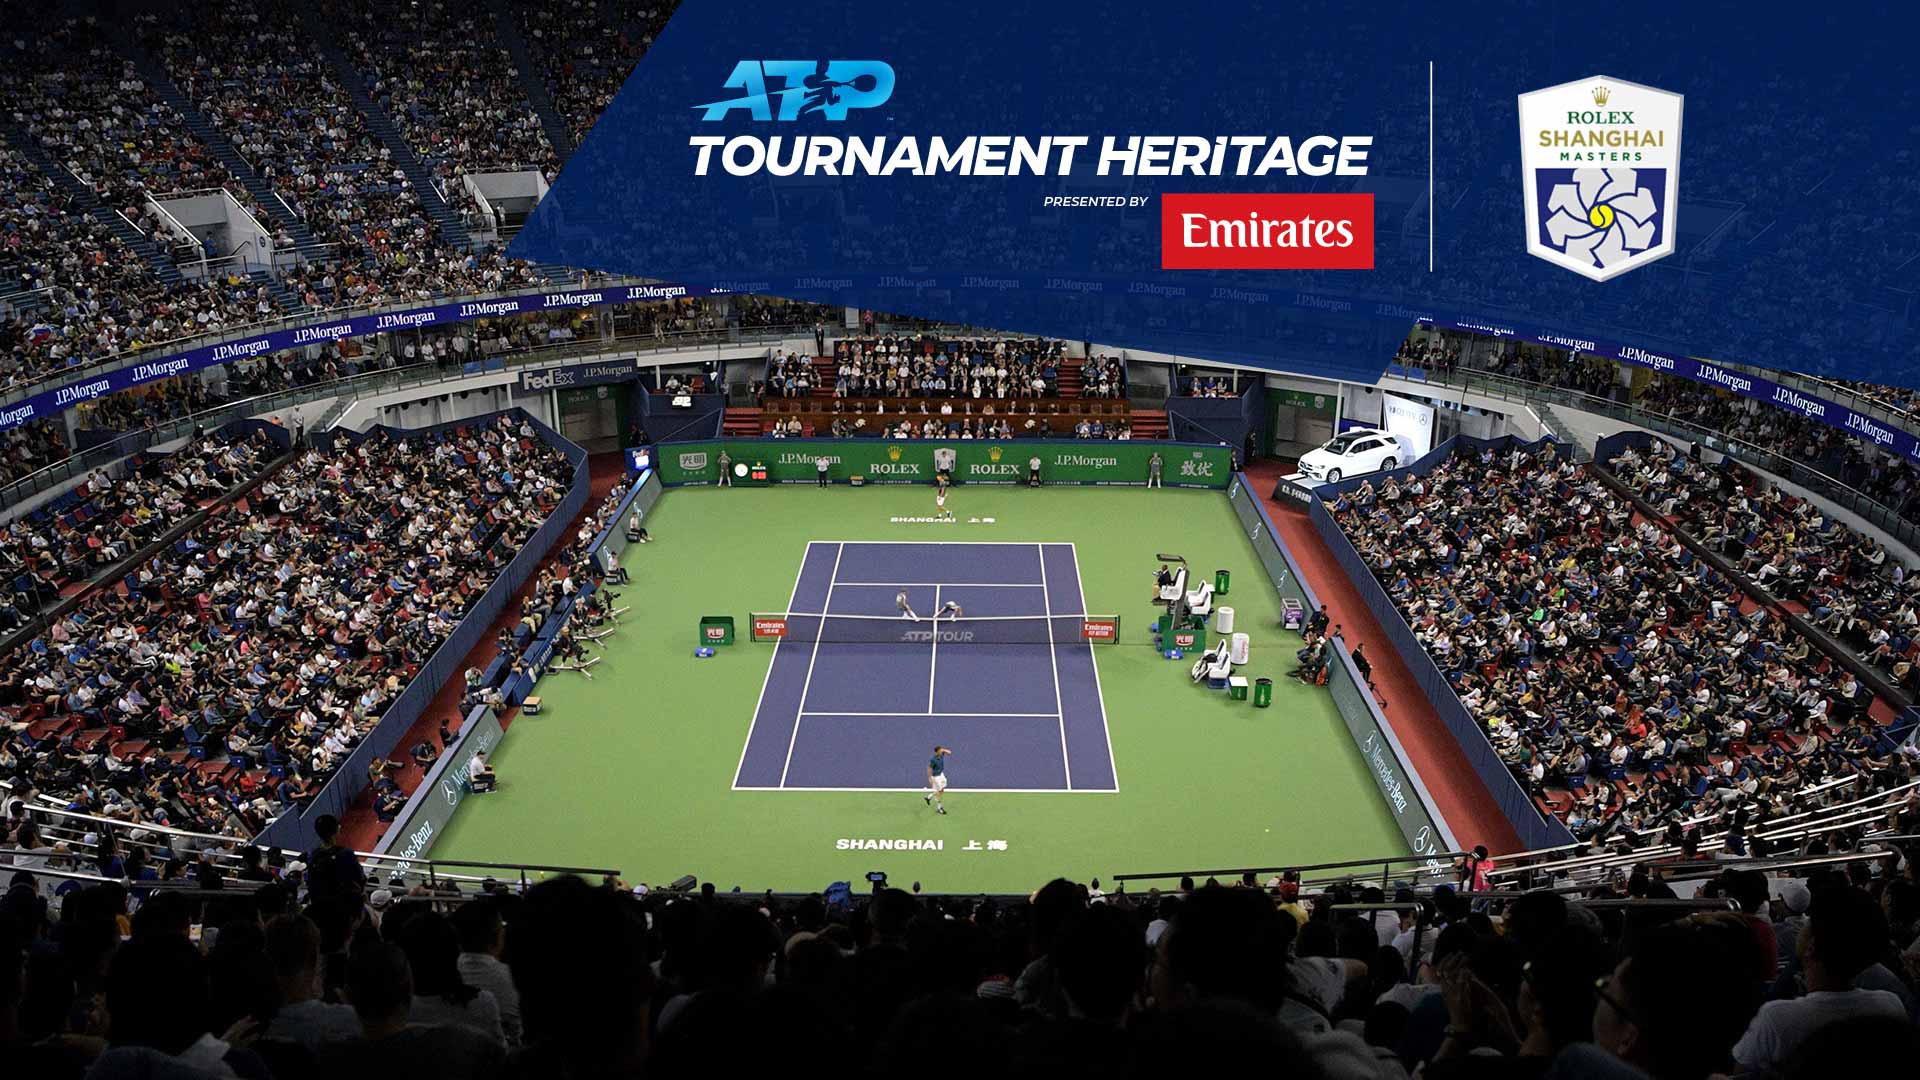 The Rolex Shanghai Masters is a five-time winner of the ATP Masters 1000 Tournament of the Year award.